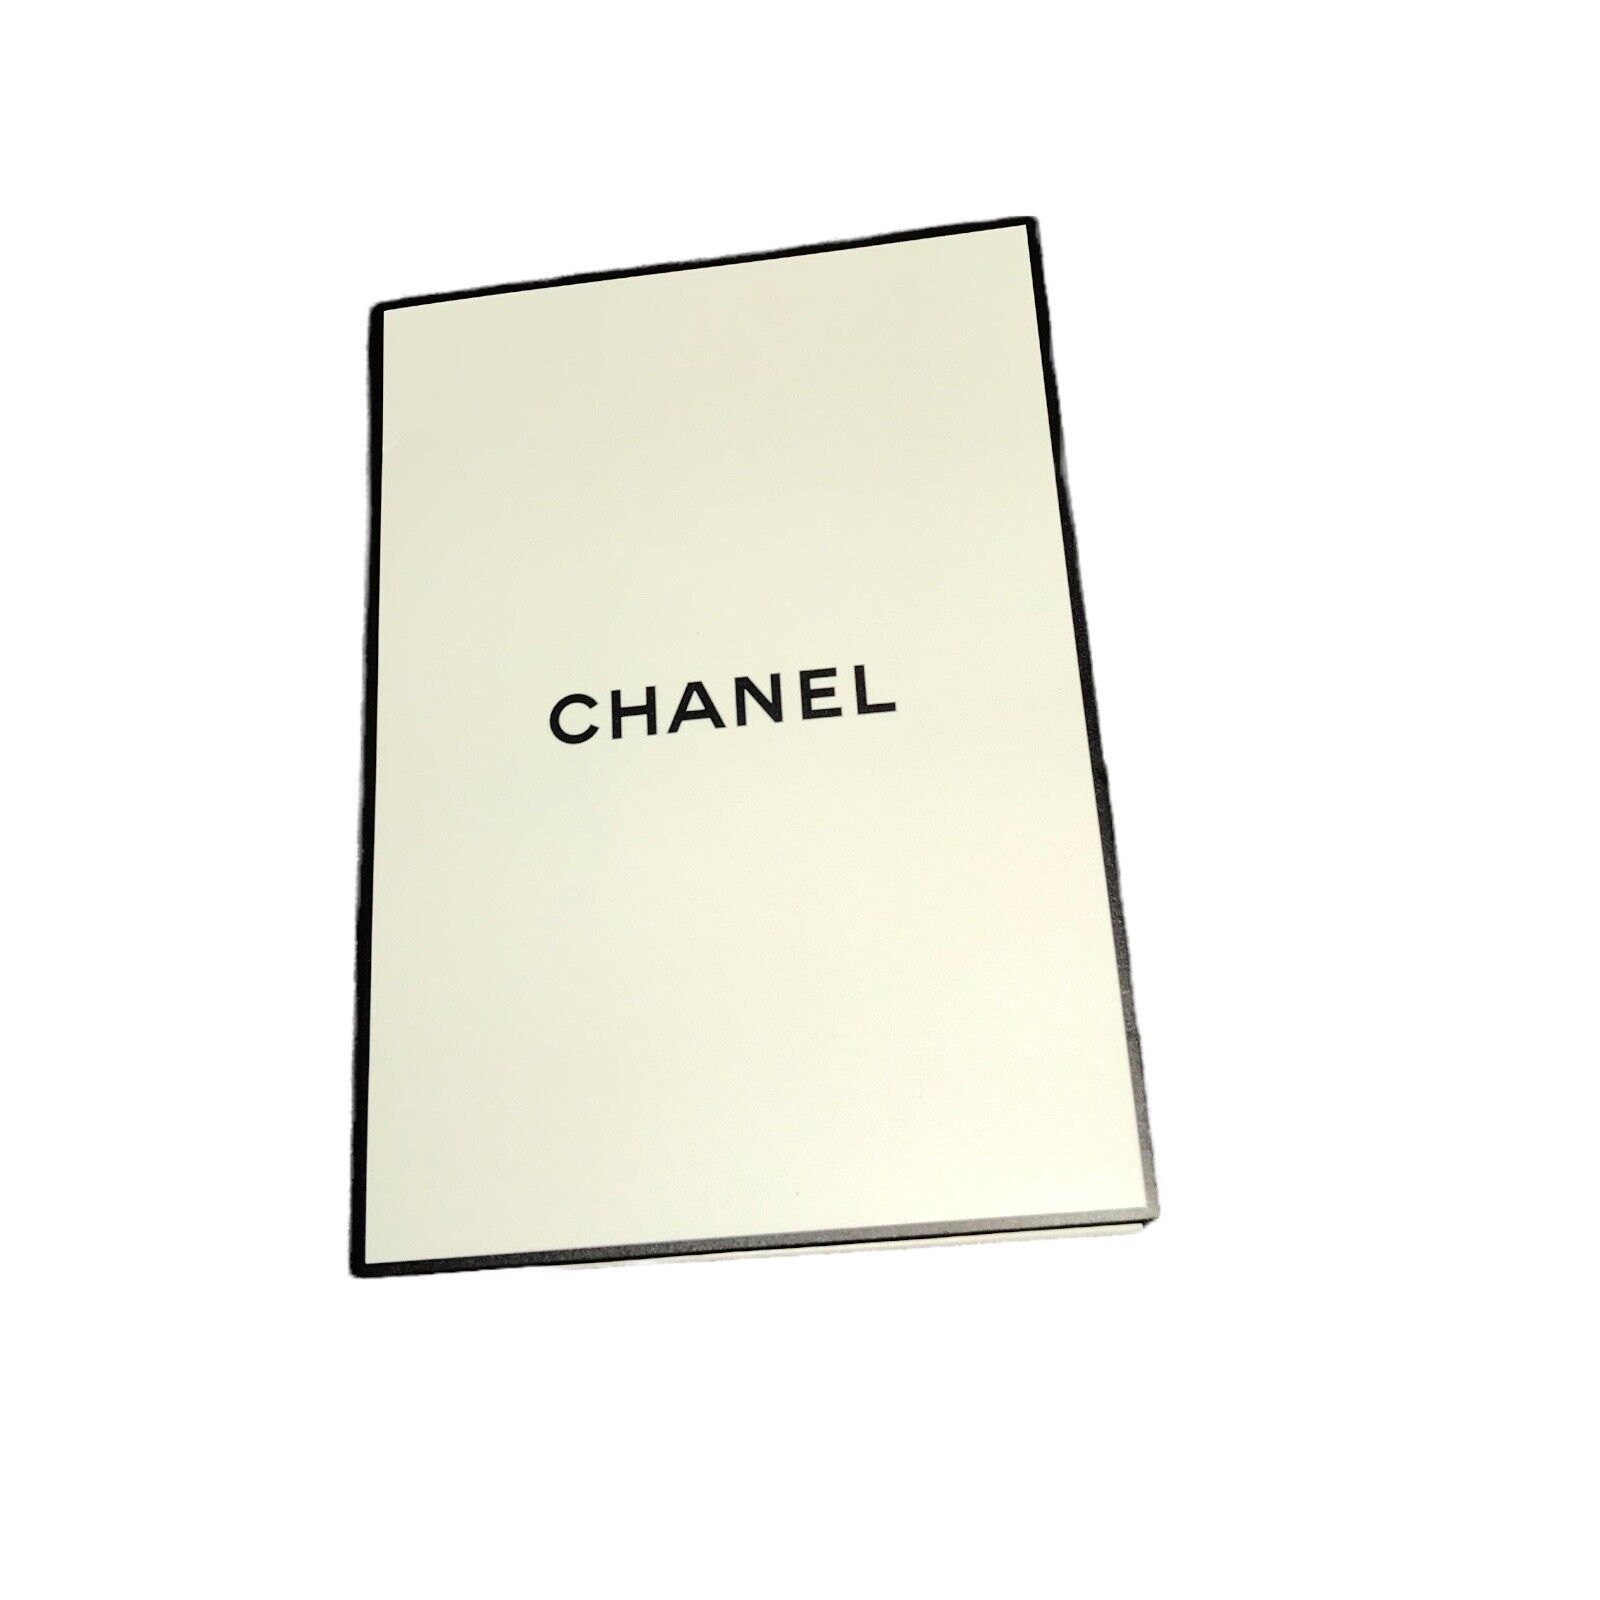 Chanel Shopping Paper Bags and More and 50 similar items